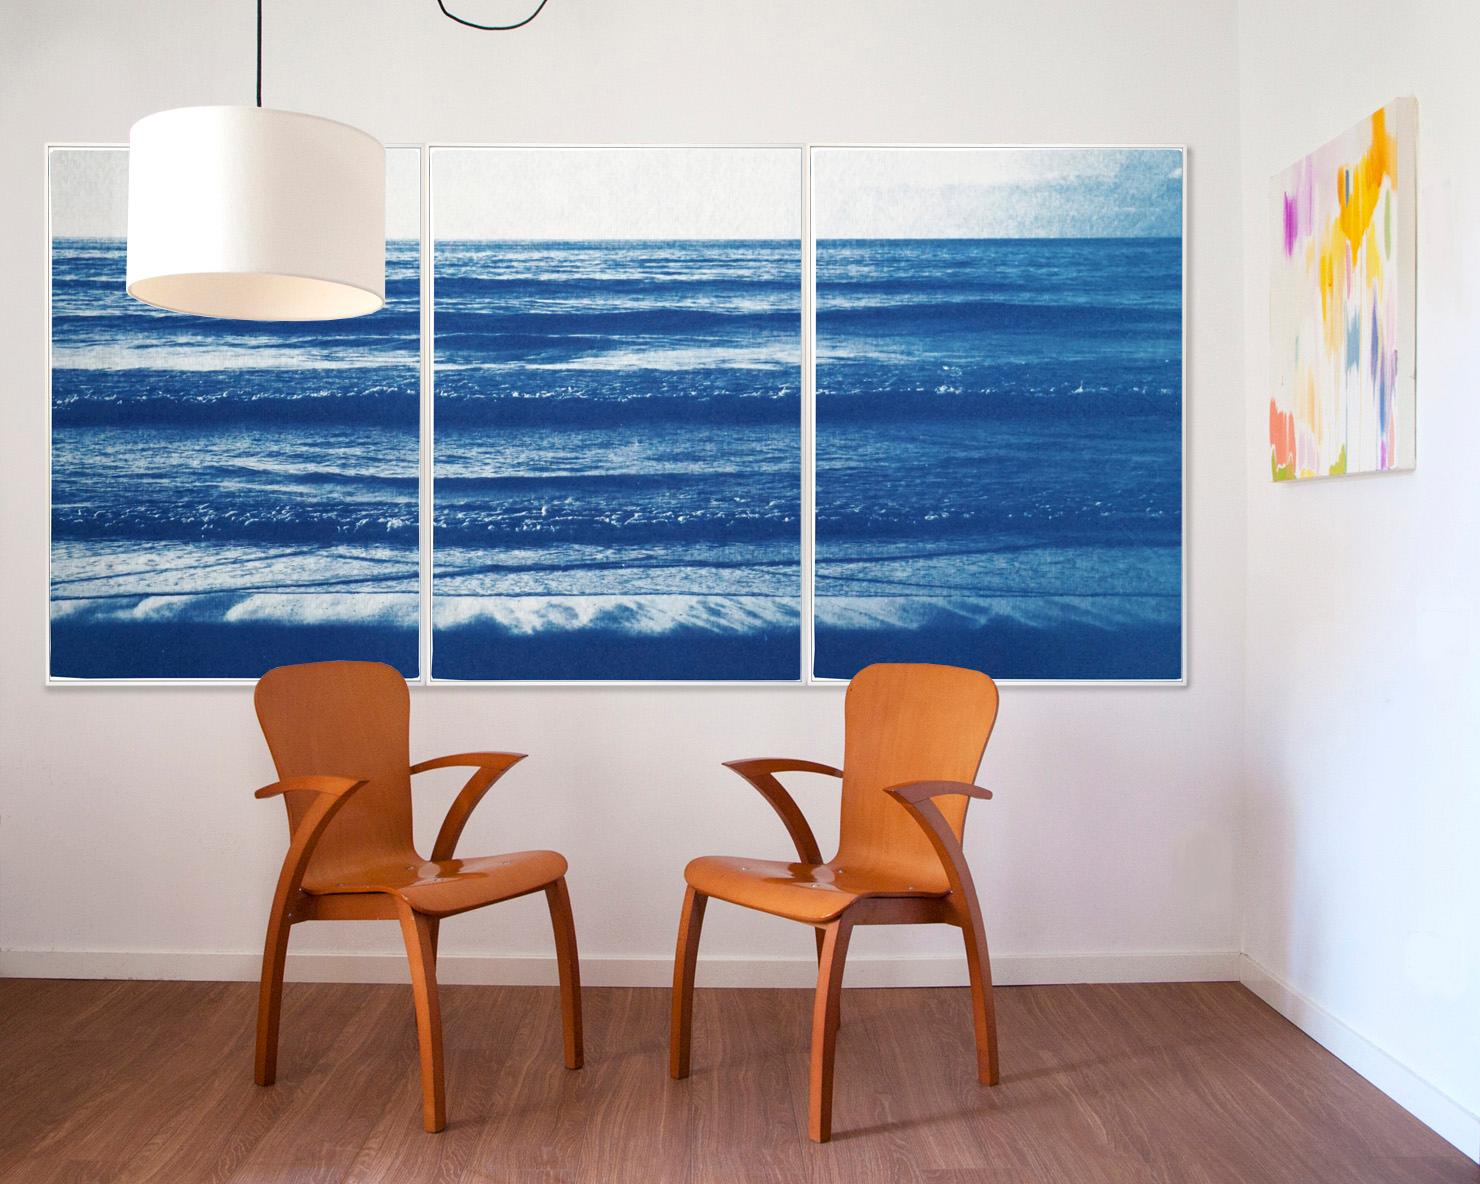 Pacific Beach Horizon, Nautical Triptych Cyanotype, White and Blue Seascape, Zen - Photograph by Kind of Cyan